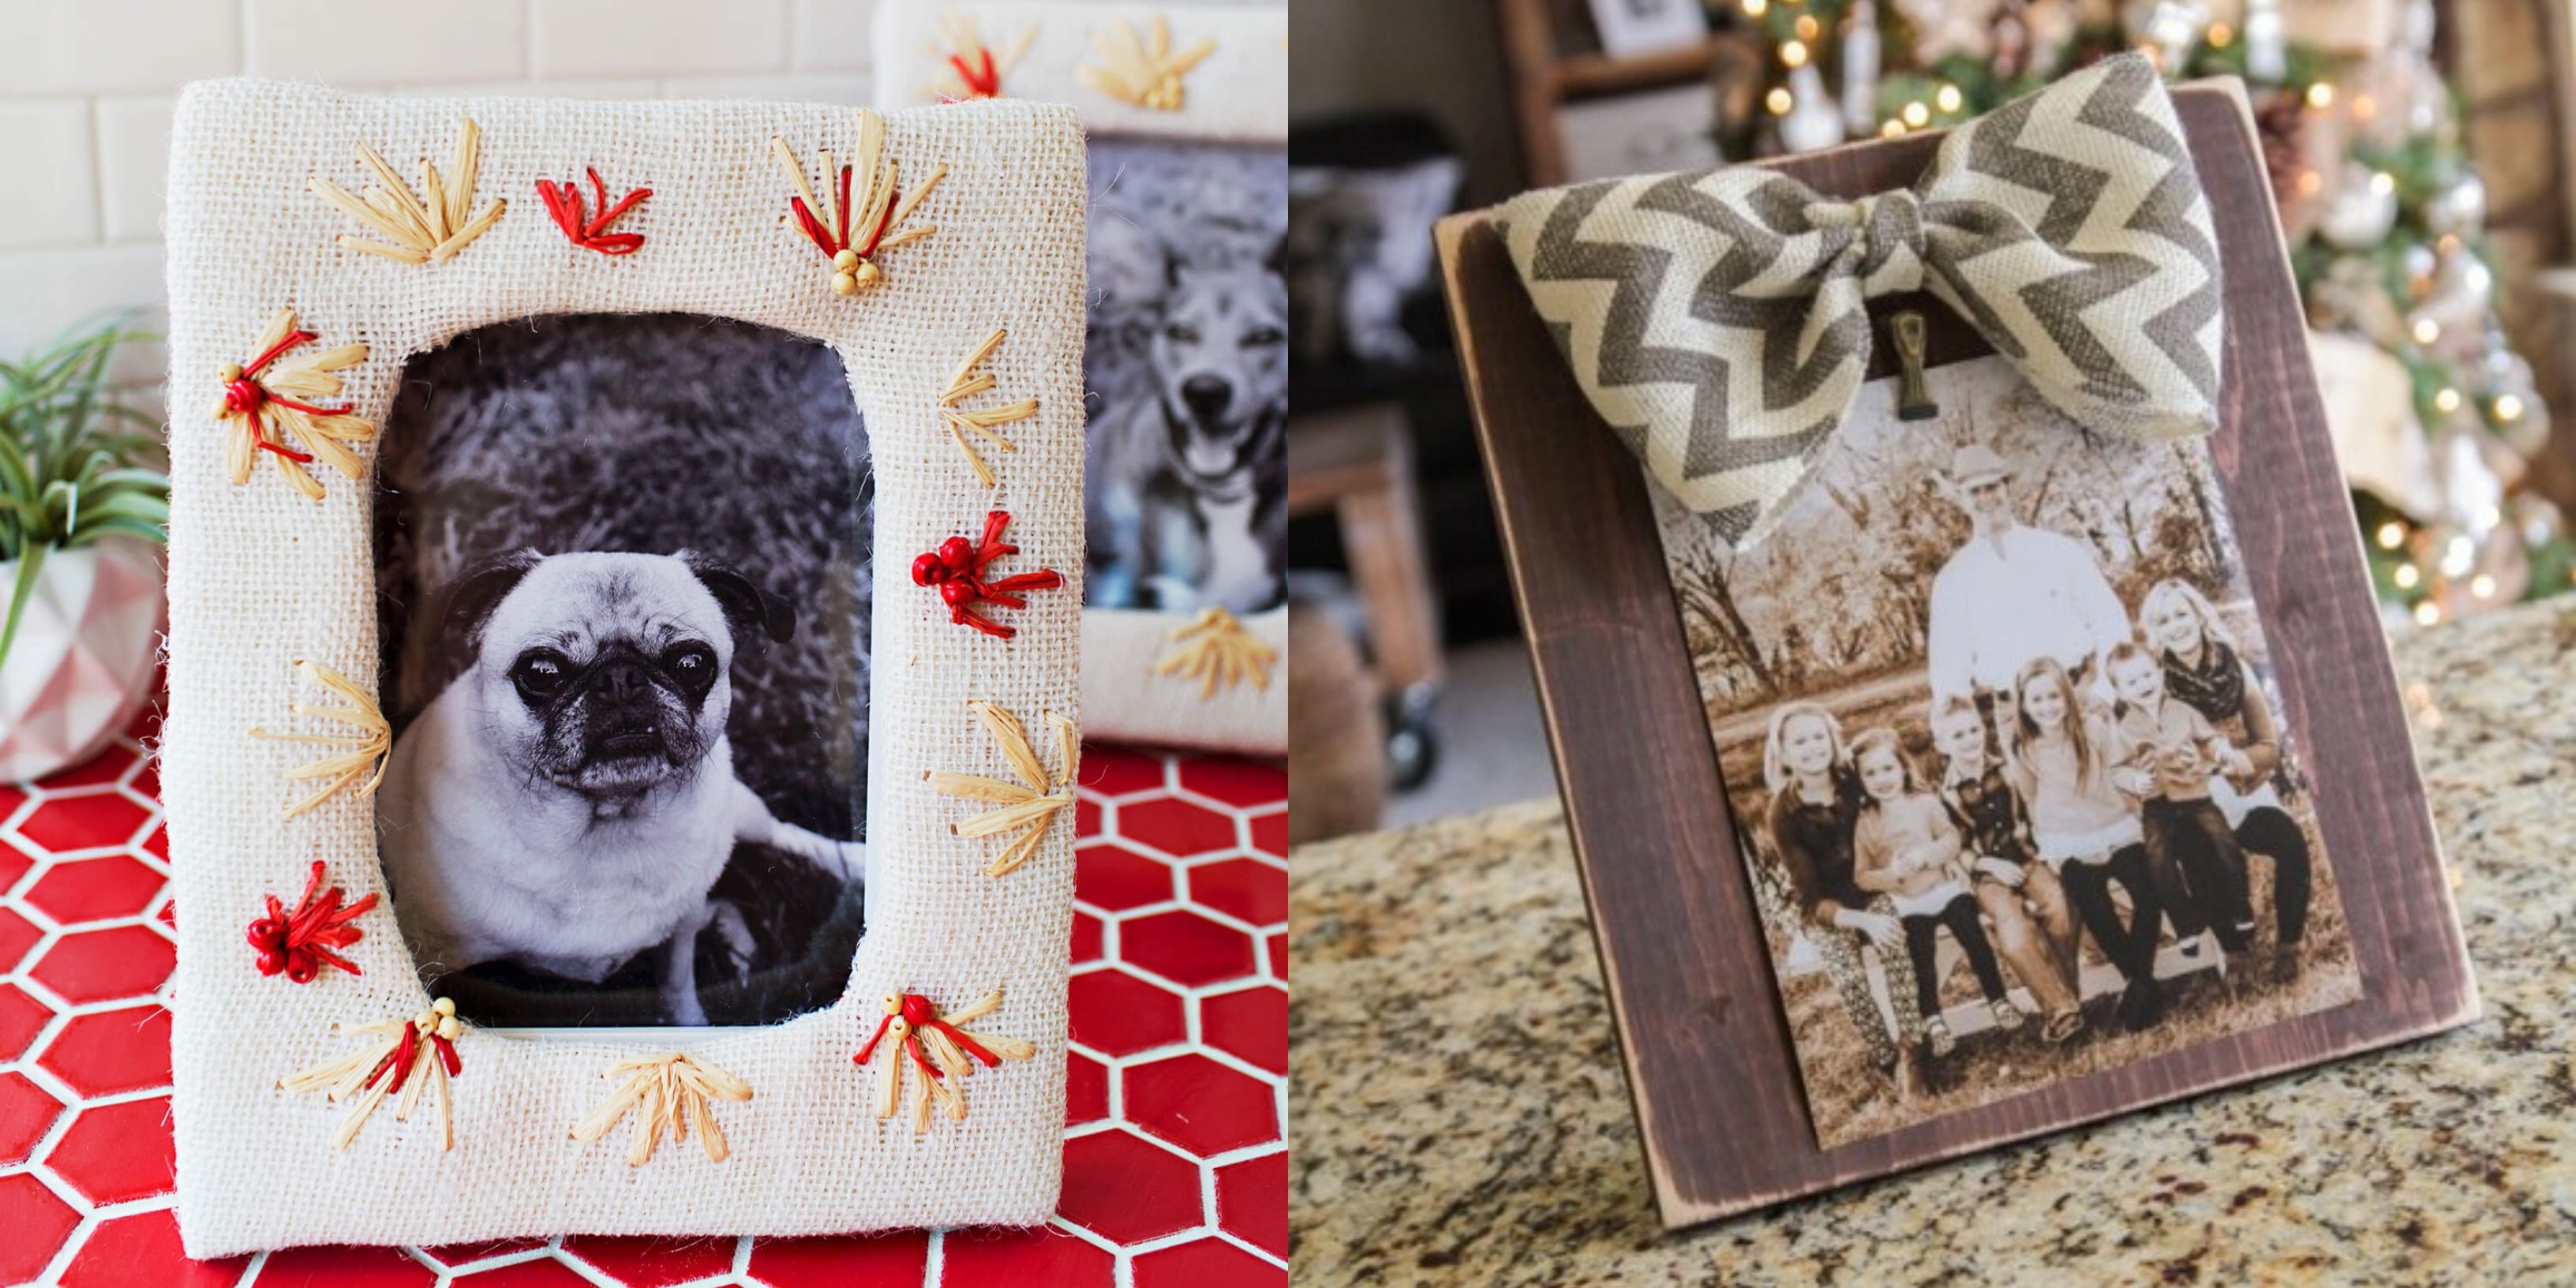 16 DIY Picture Frame Ideas - How to Make a Wooden Picture Frame